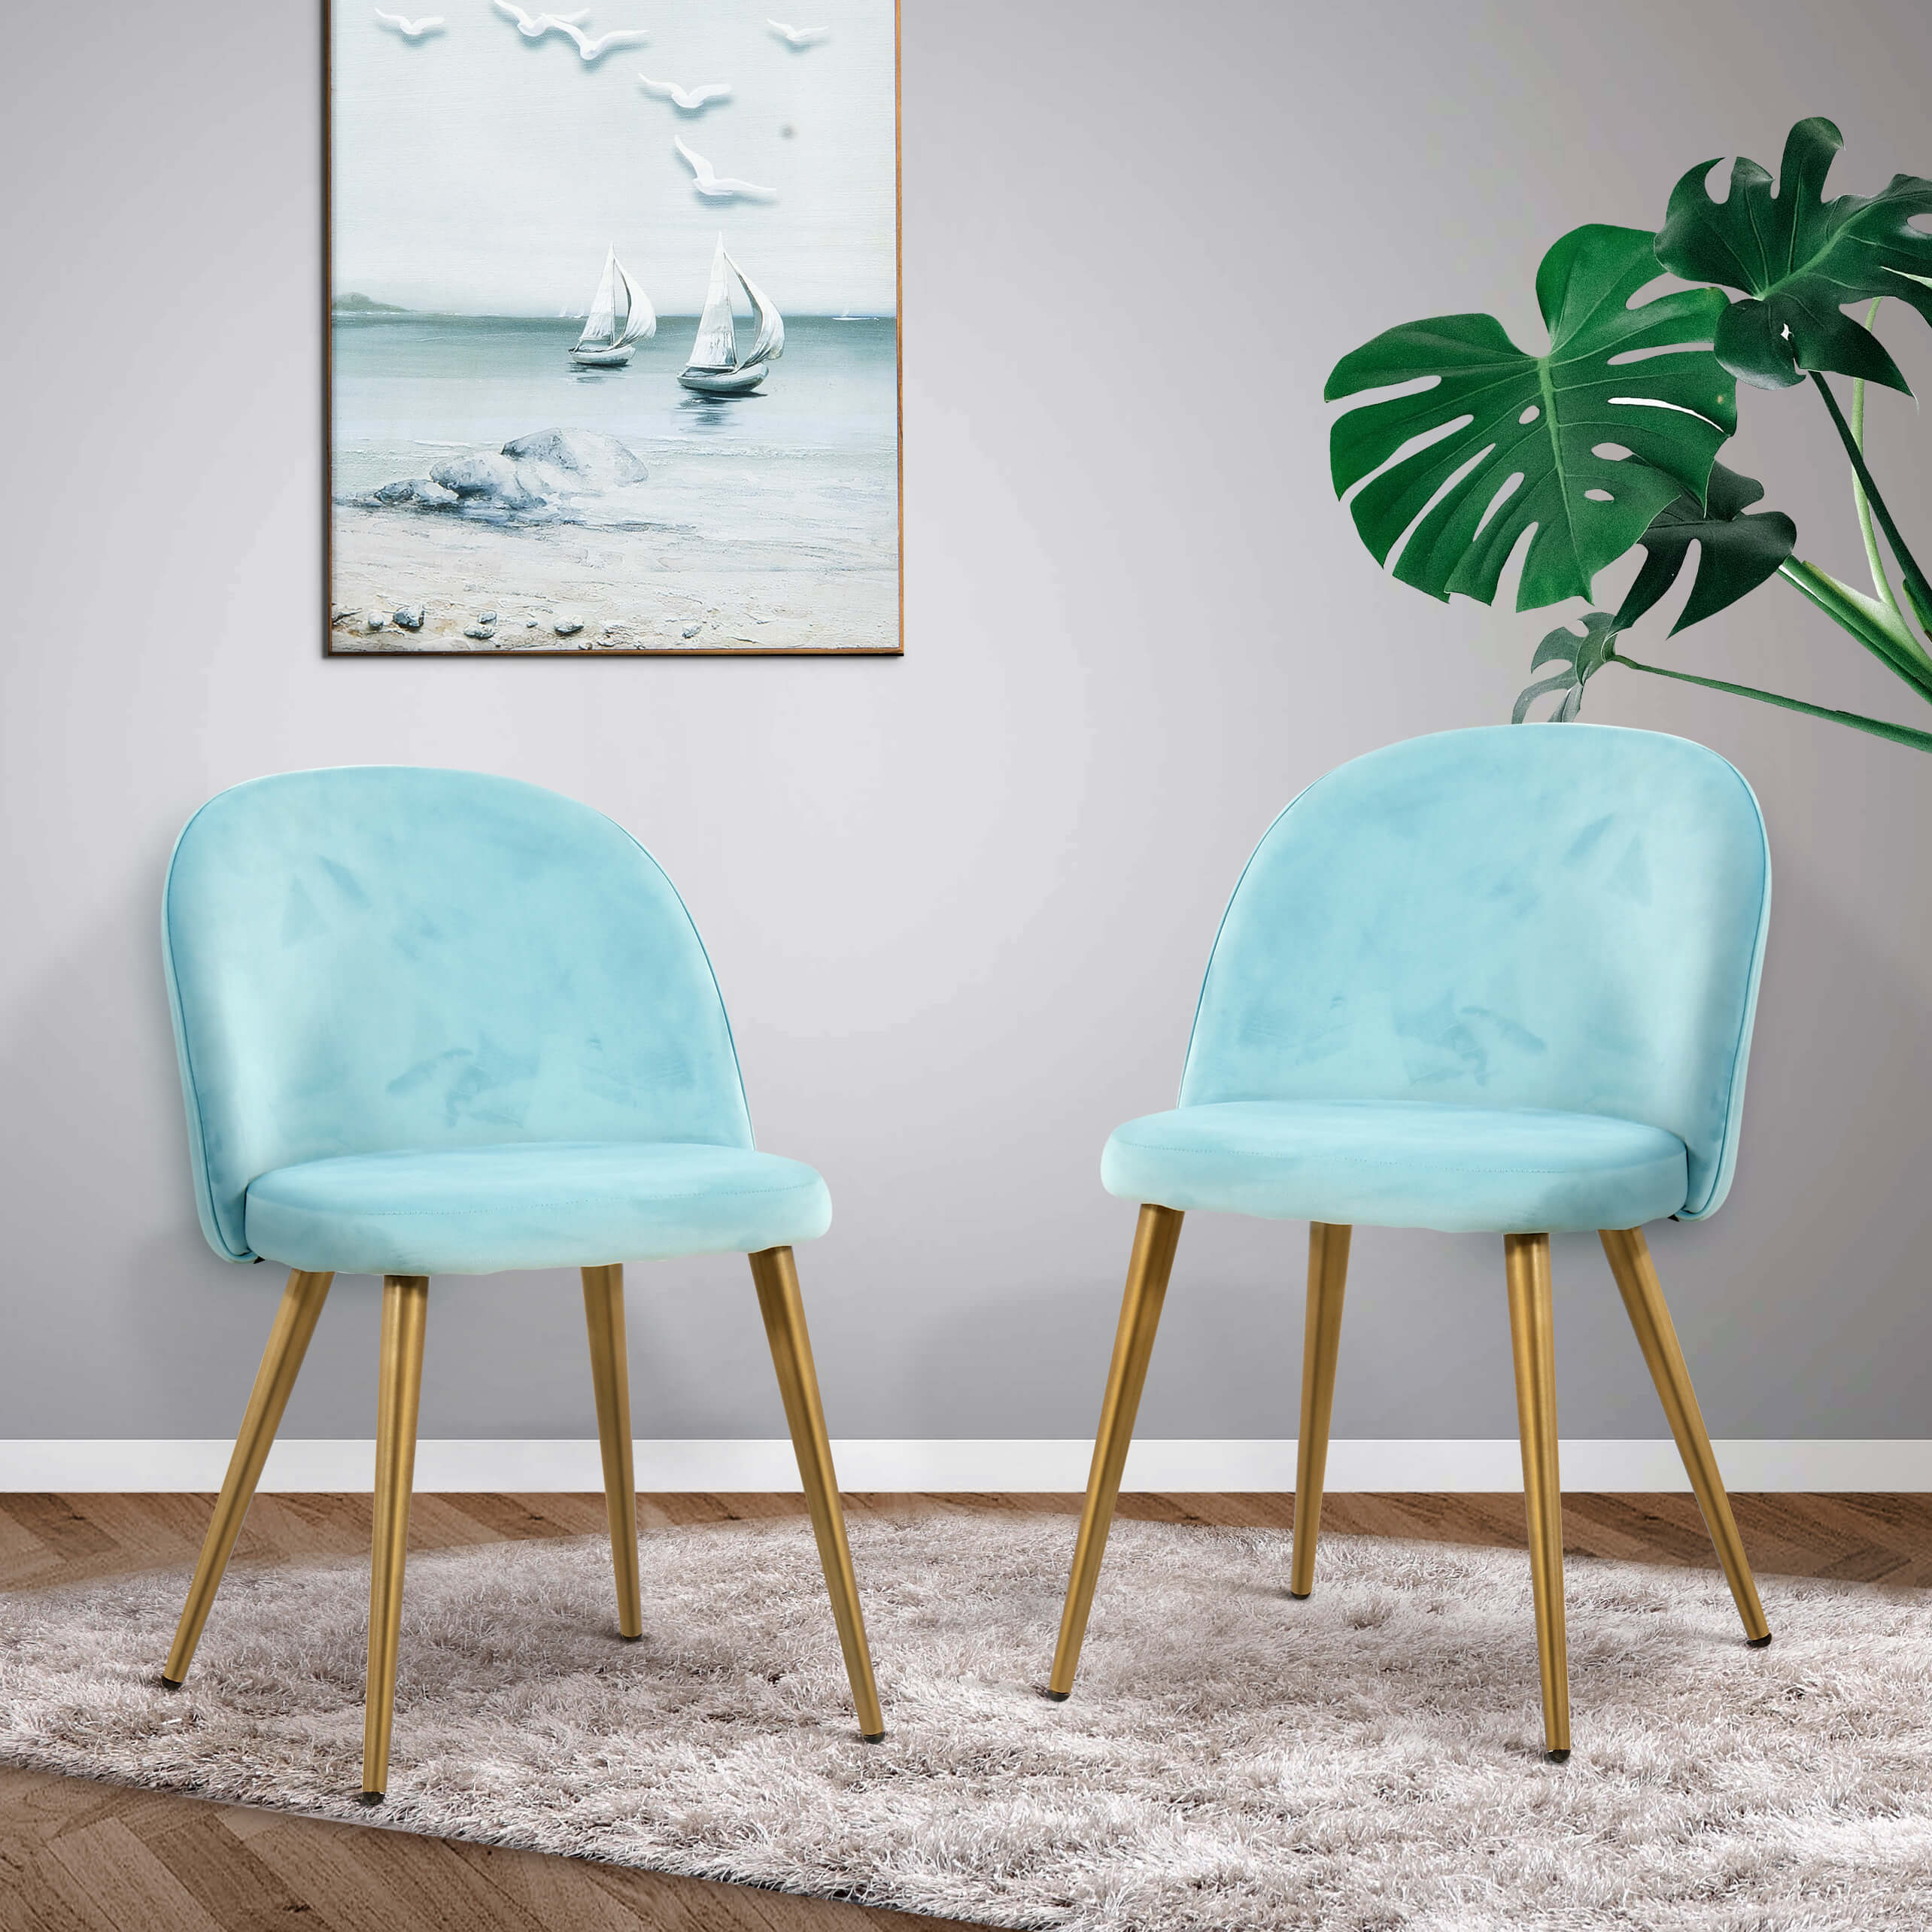 Ivinta Velvet Dining Chairs Set of 2, Soft Tufted Modern Living Room Chairs